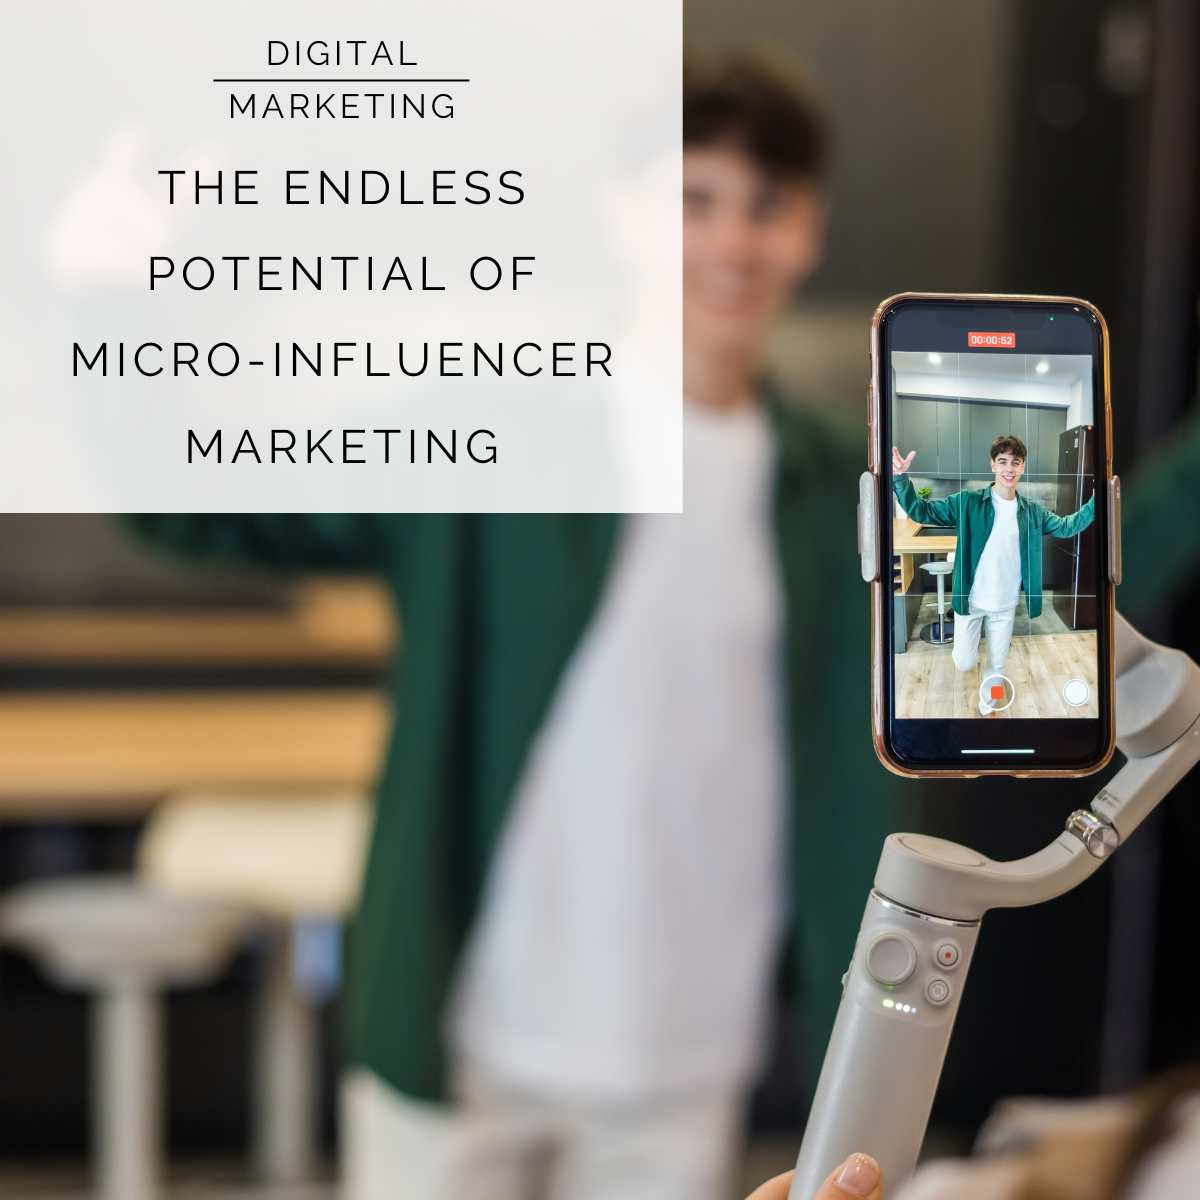 The Endless Potential of Micro-Influencer Marketing